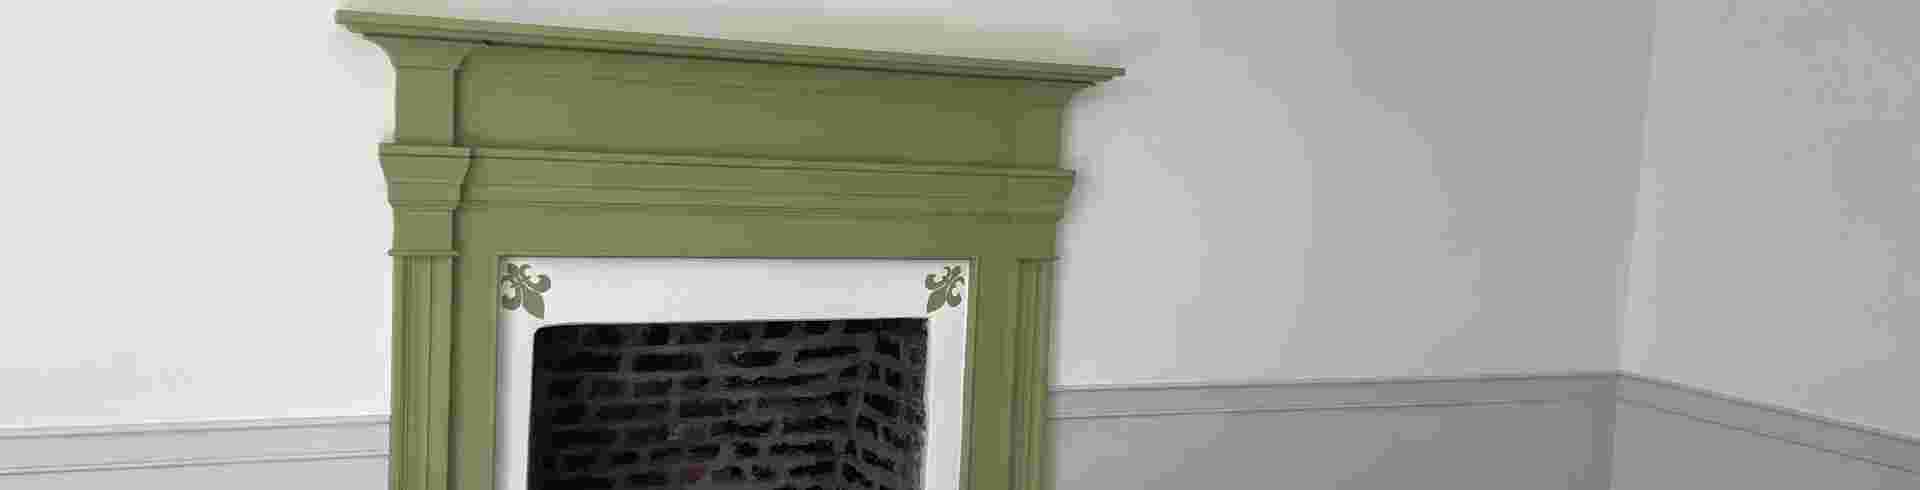 The Sunnyside Sisters Bed and Breakfast / Clarksville VA / Fireplace mantel Olive